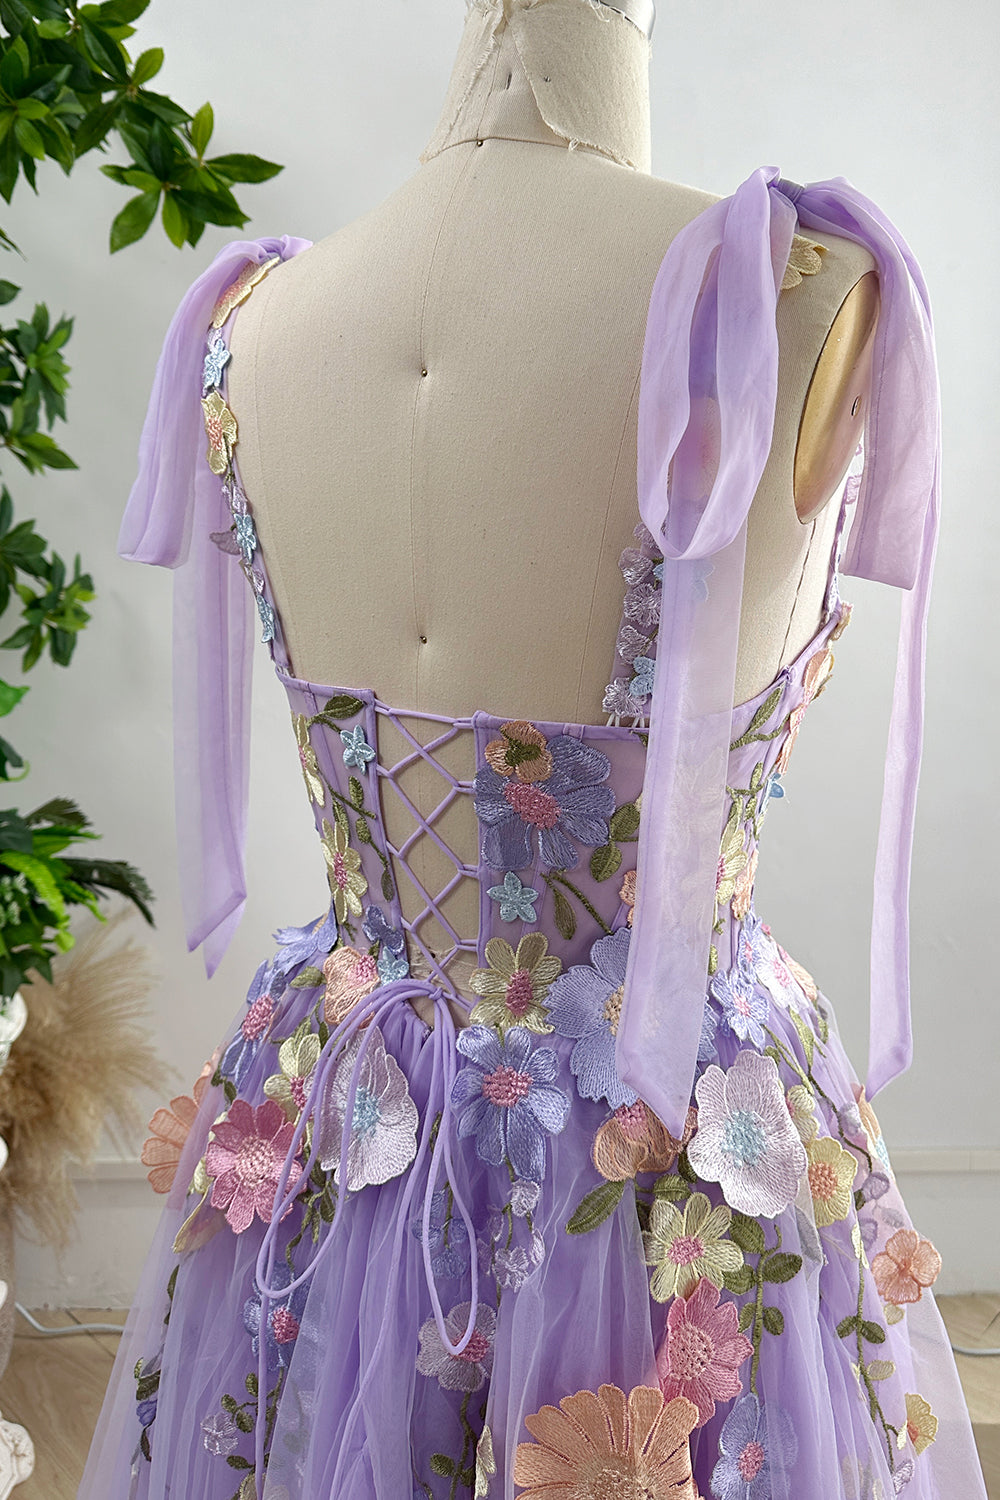 Lavender Embroidery Floral Corset Long Dress with Tie Straps